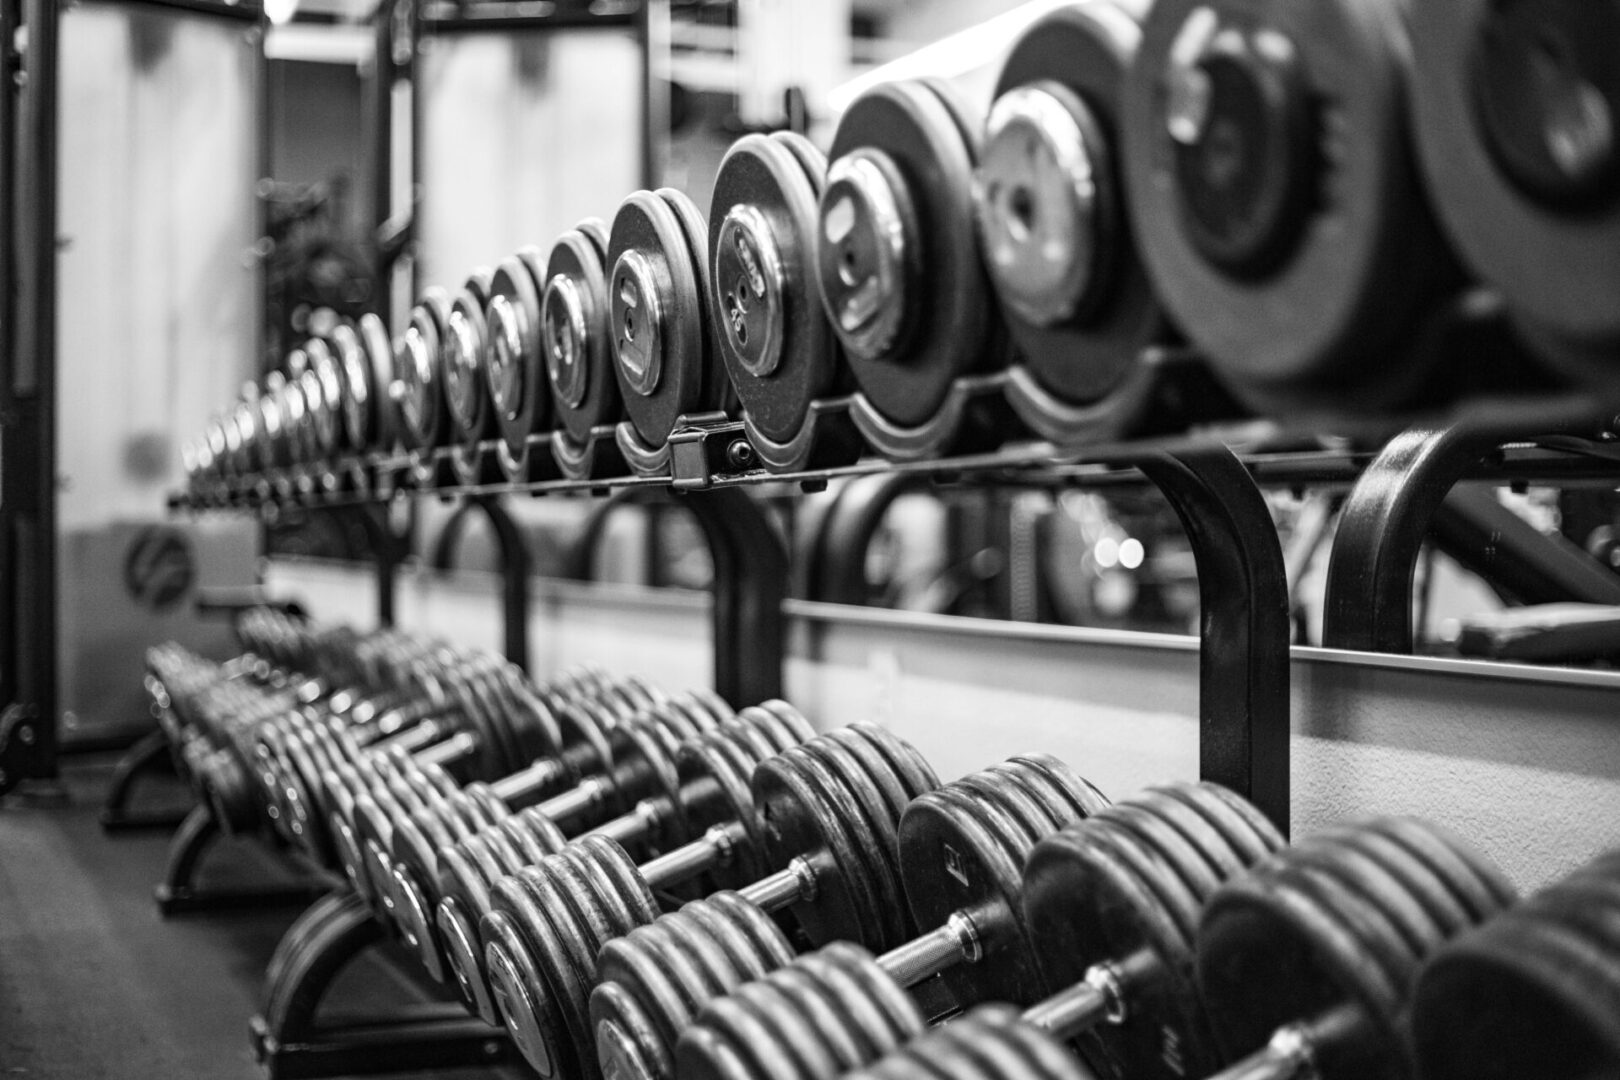 Many metal heavy dumbbells on a rack in the gym